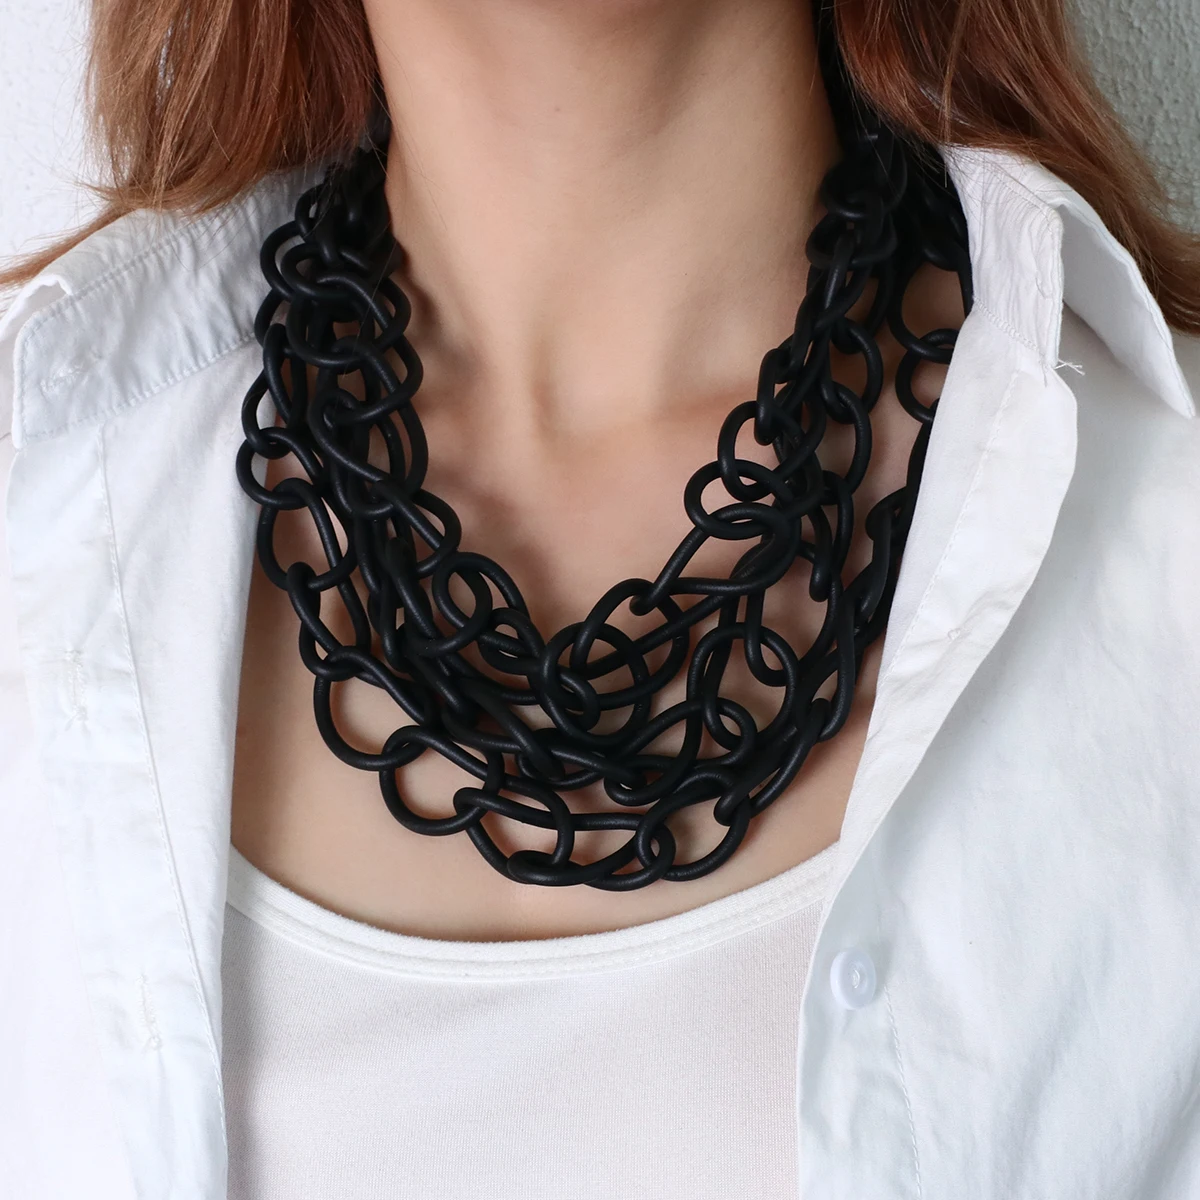 Amorcome Unique Design Bib Necklace Black Rubber Short Choker Statement Necklace for Women Clothes Jewelry Gifts